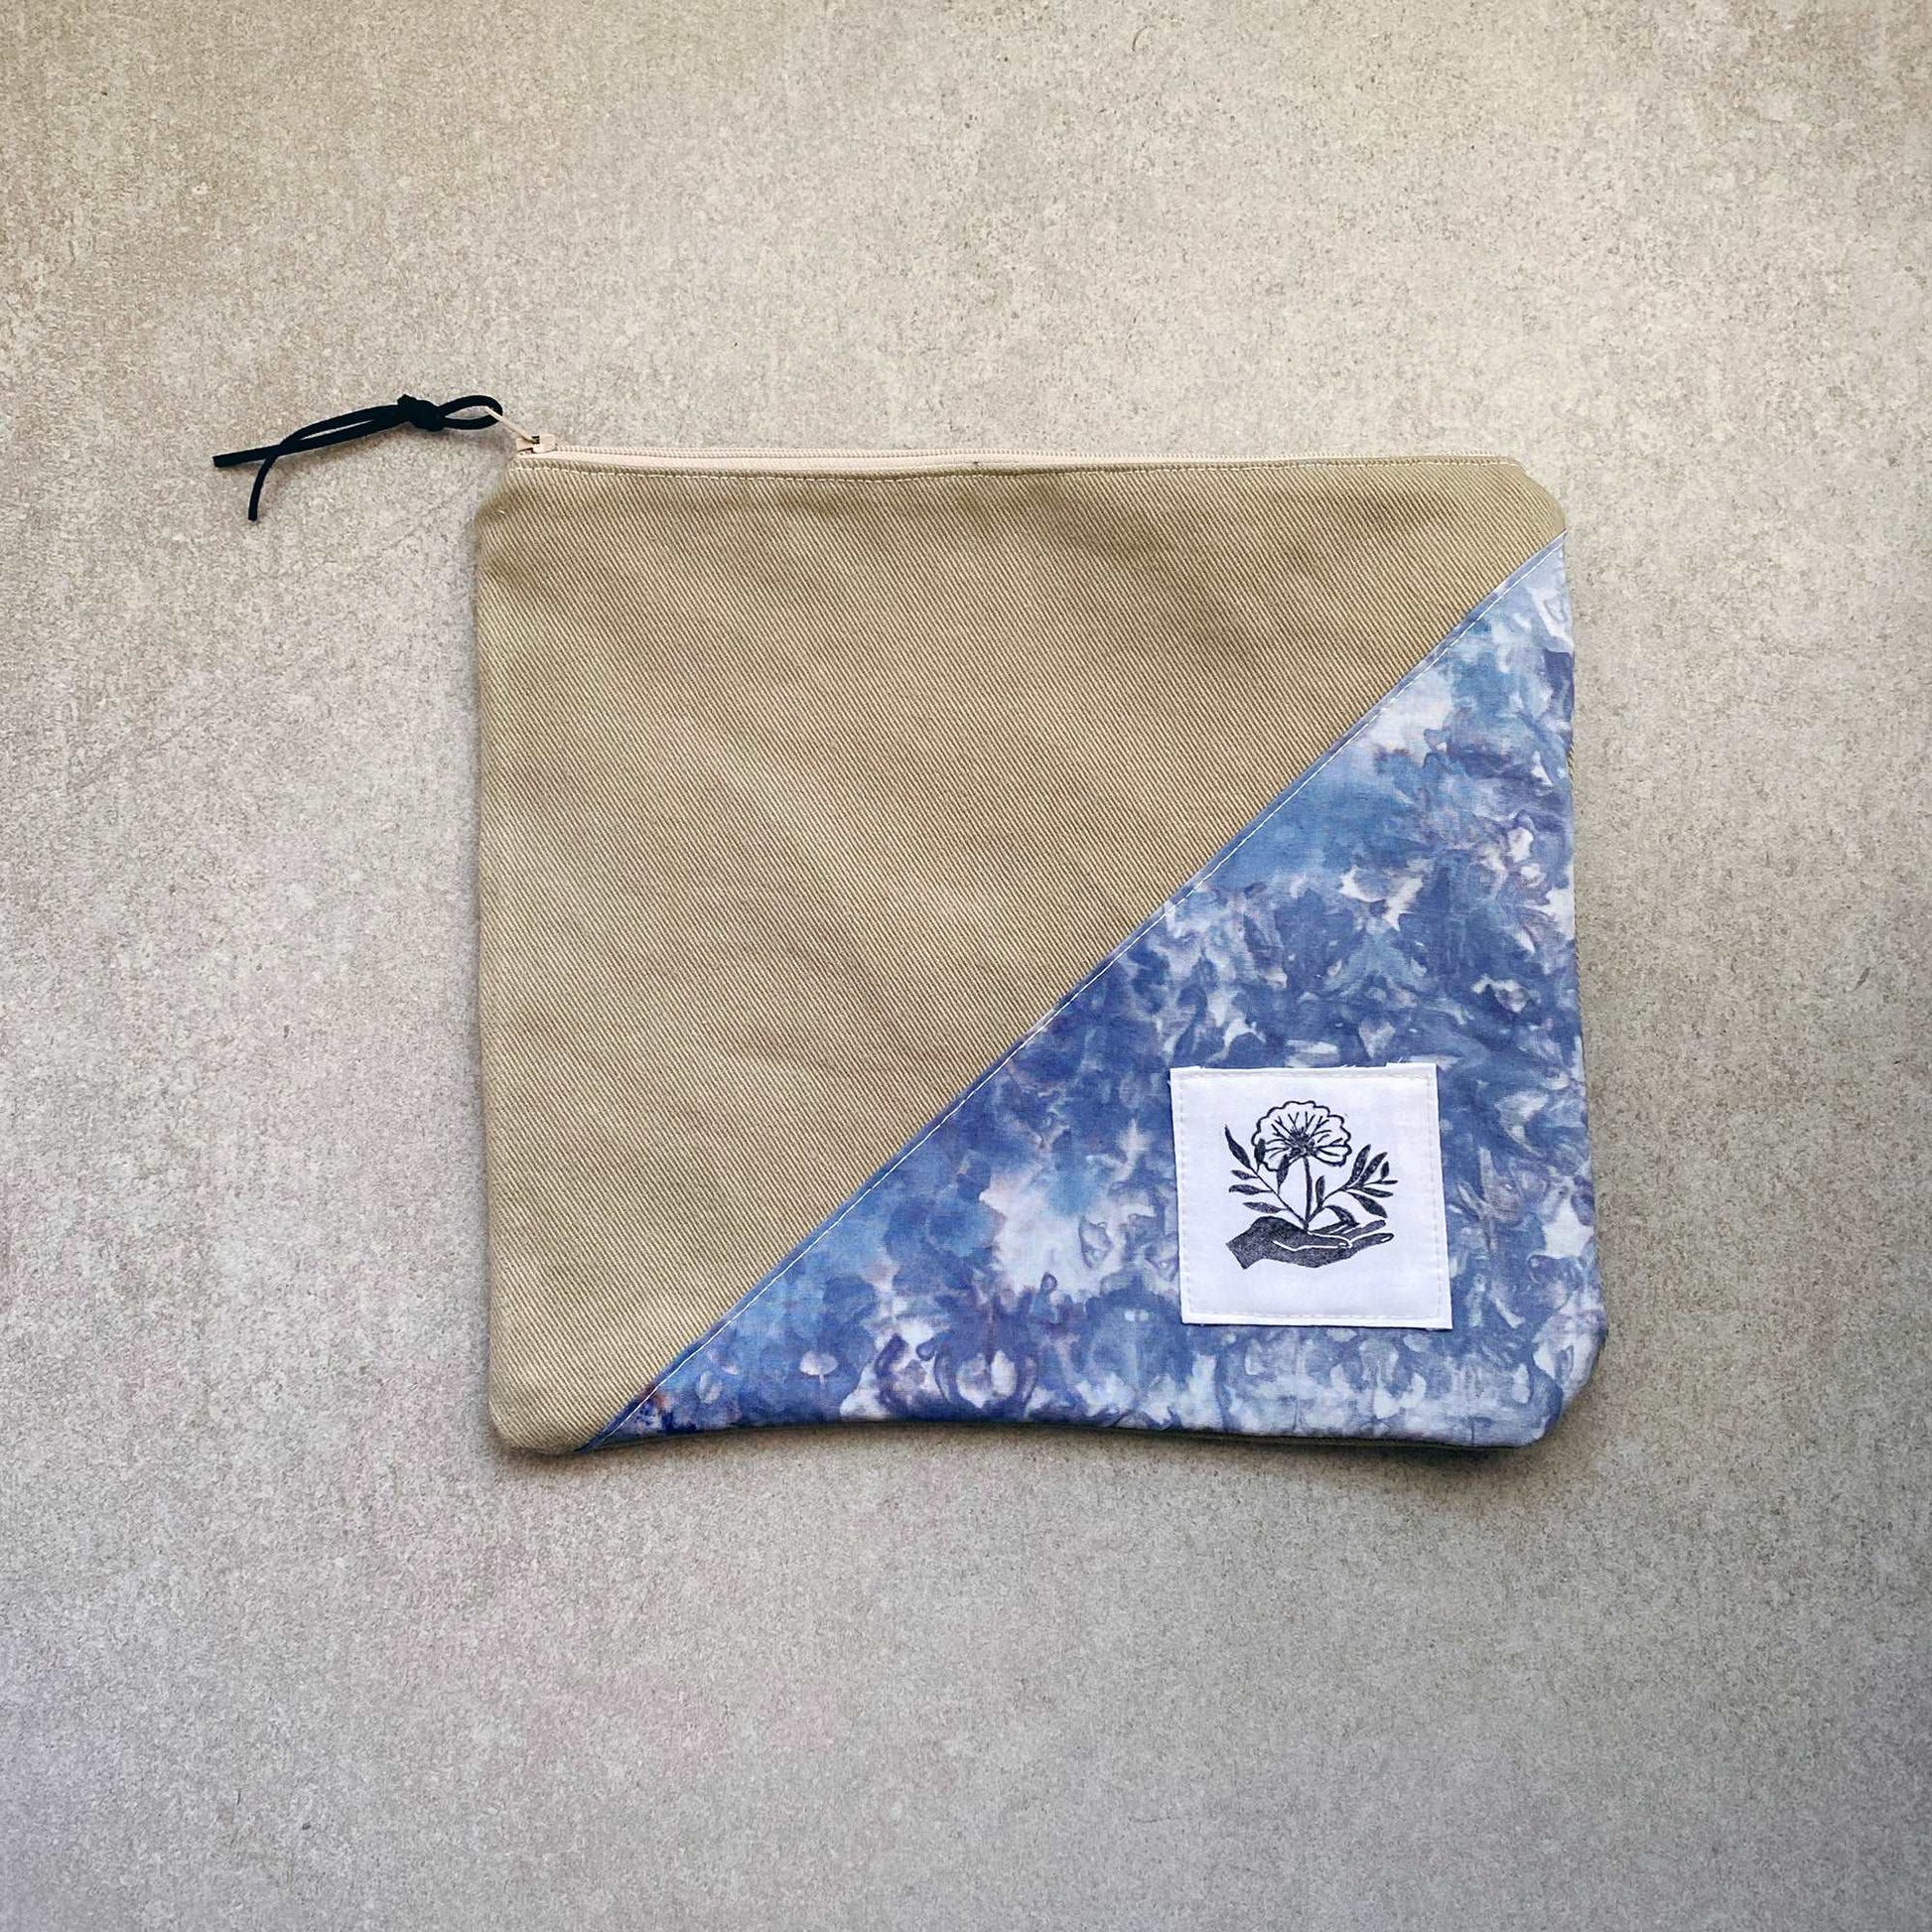 This is a photo of a large canvas zipper bag featuring a blue and white ice dyed fabric panel. It is laying on a light gray background.